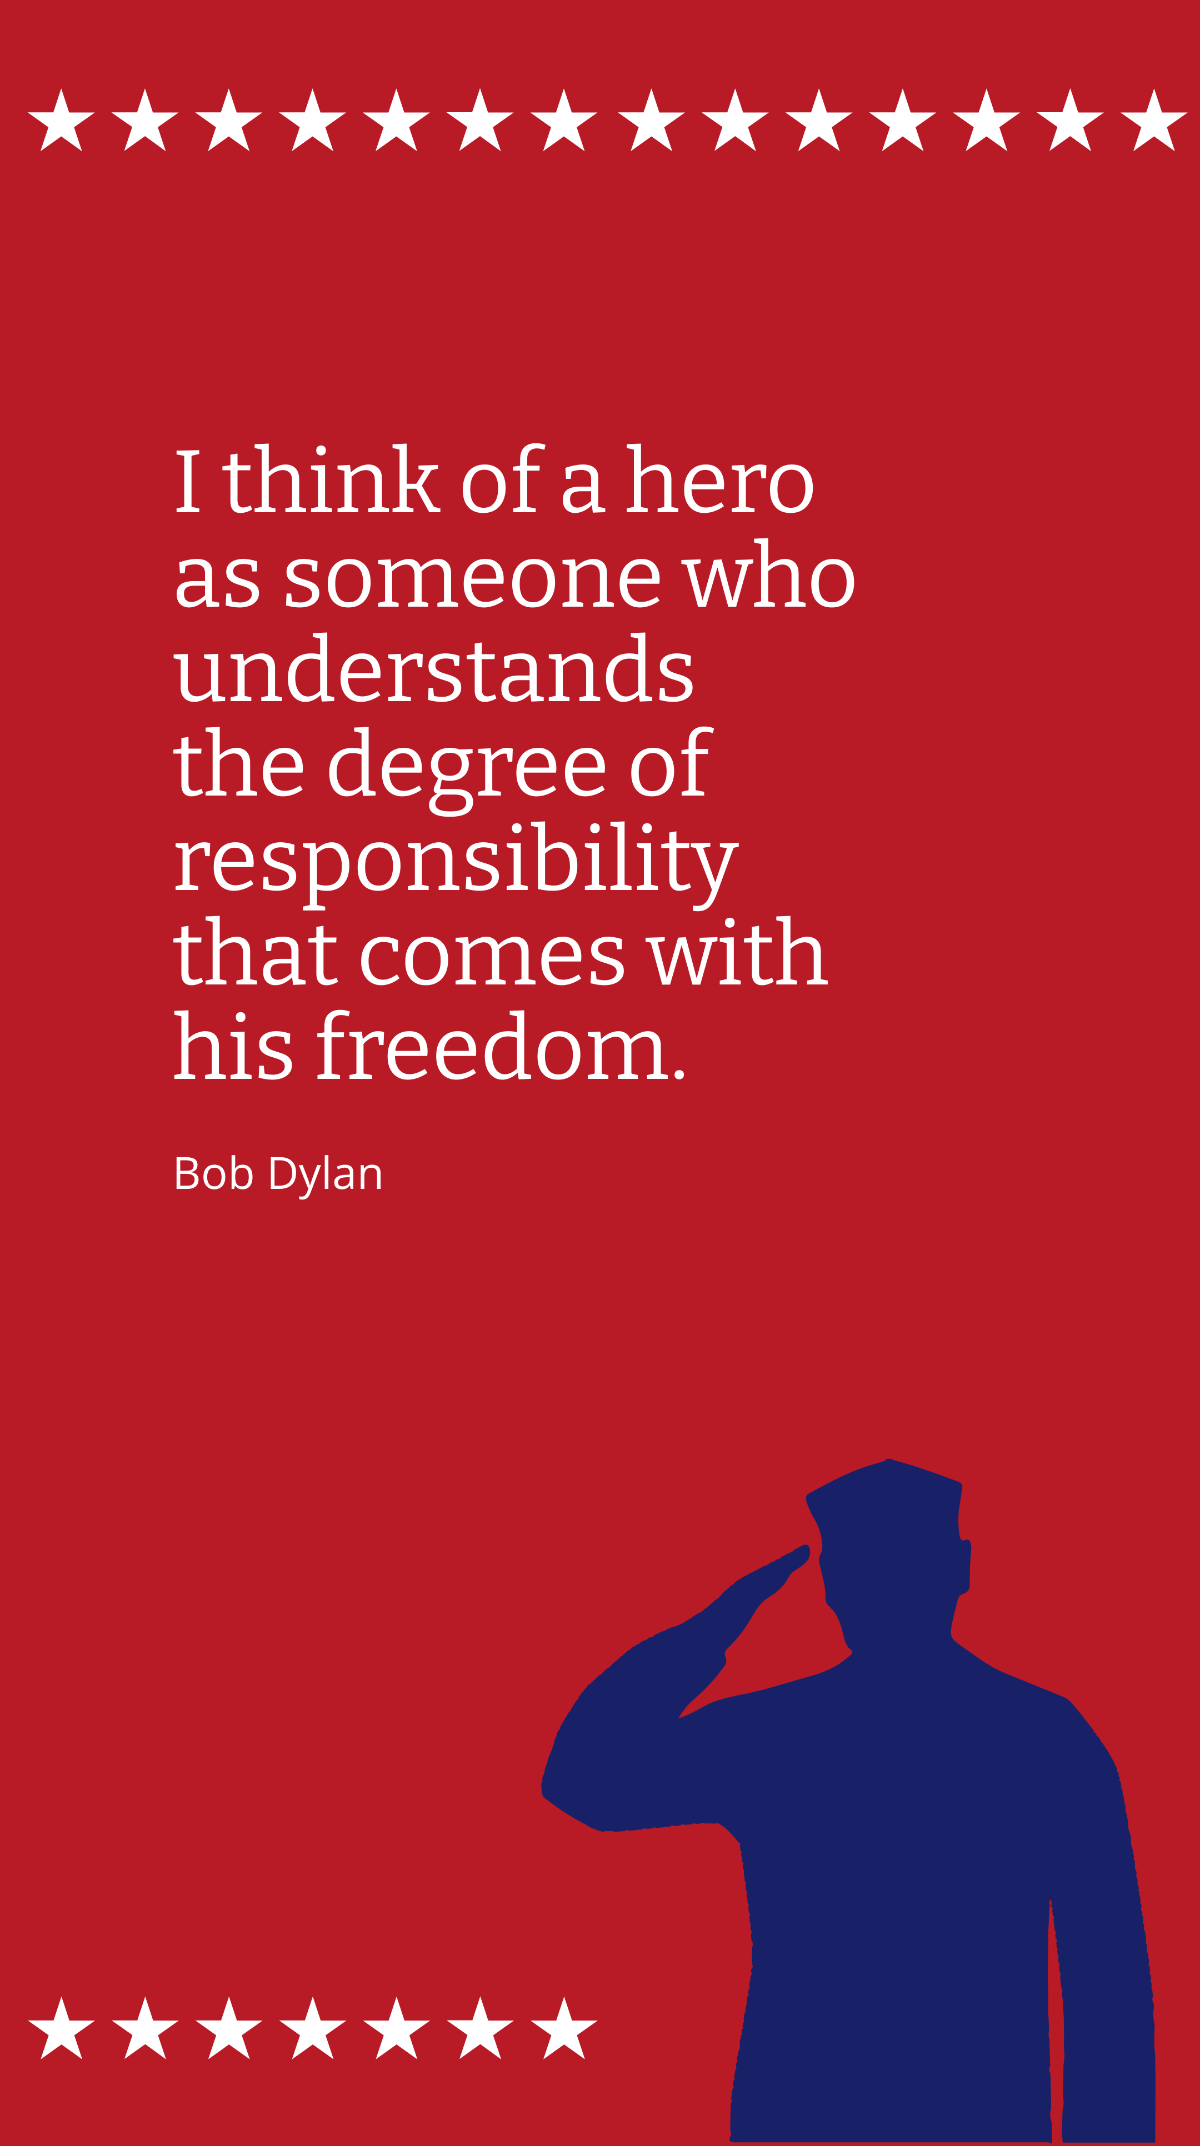 Bob Dylan - I think of a hero as someone who understands the degree of responsibility that comes with his freedom